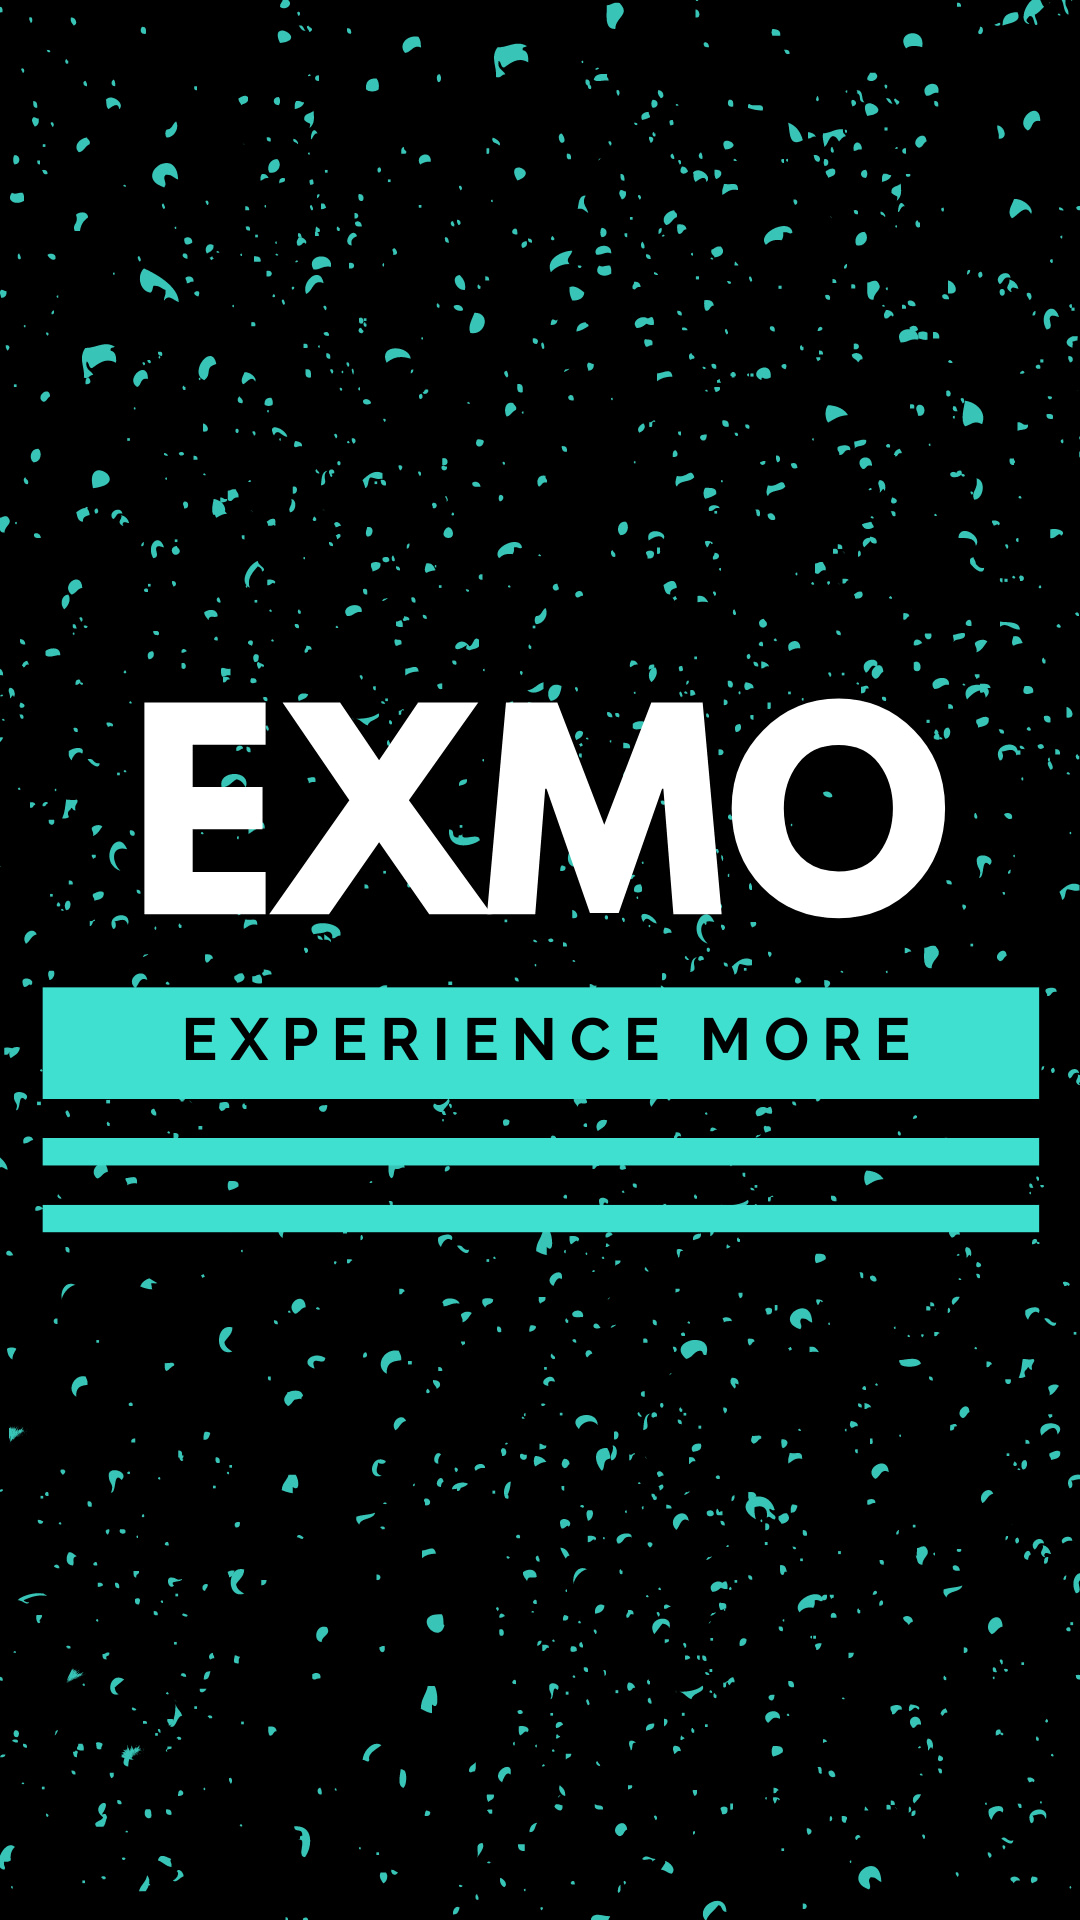 EXMO wallpaper for mobile phones